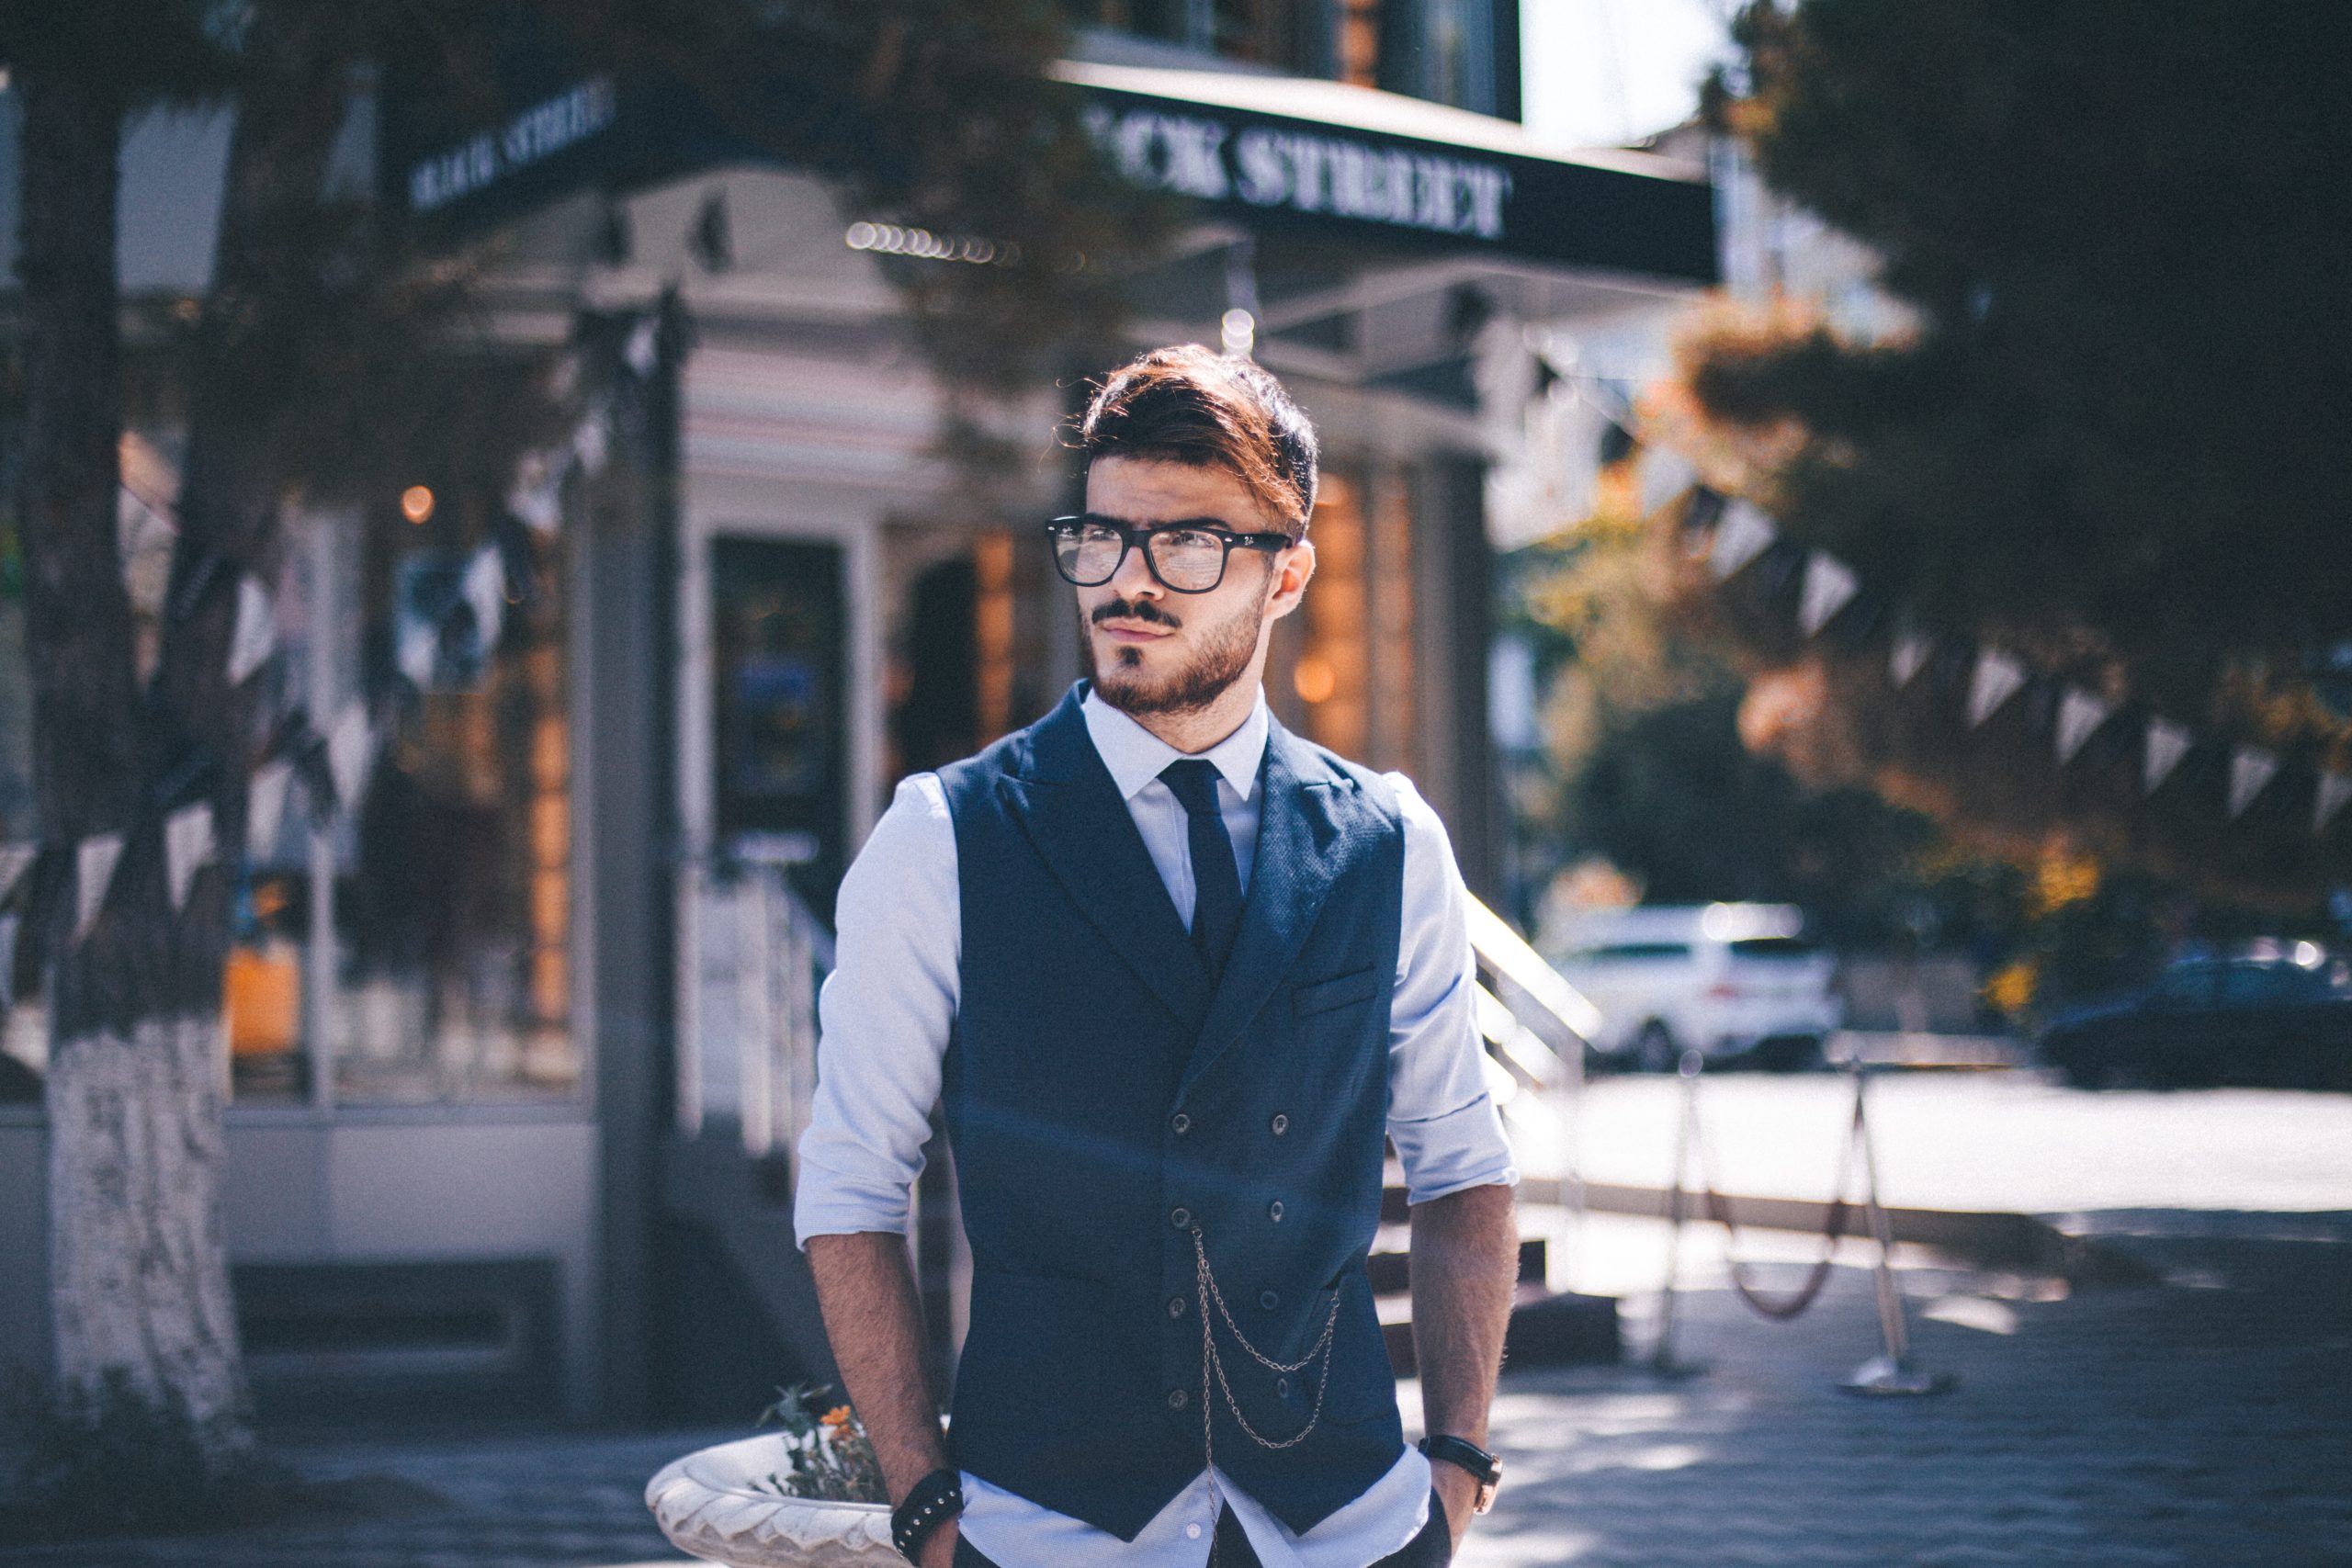 Top 12 Male Fashion Influencers in 2022